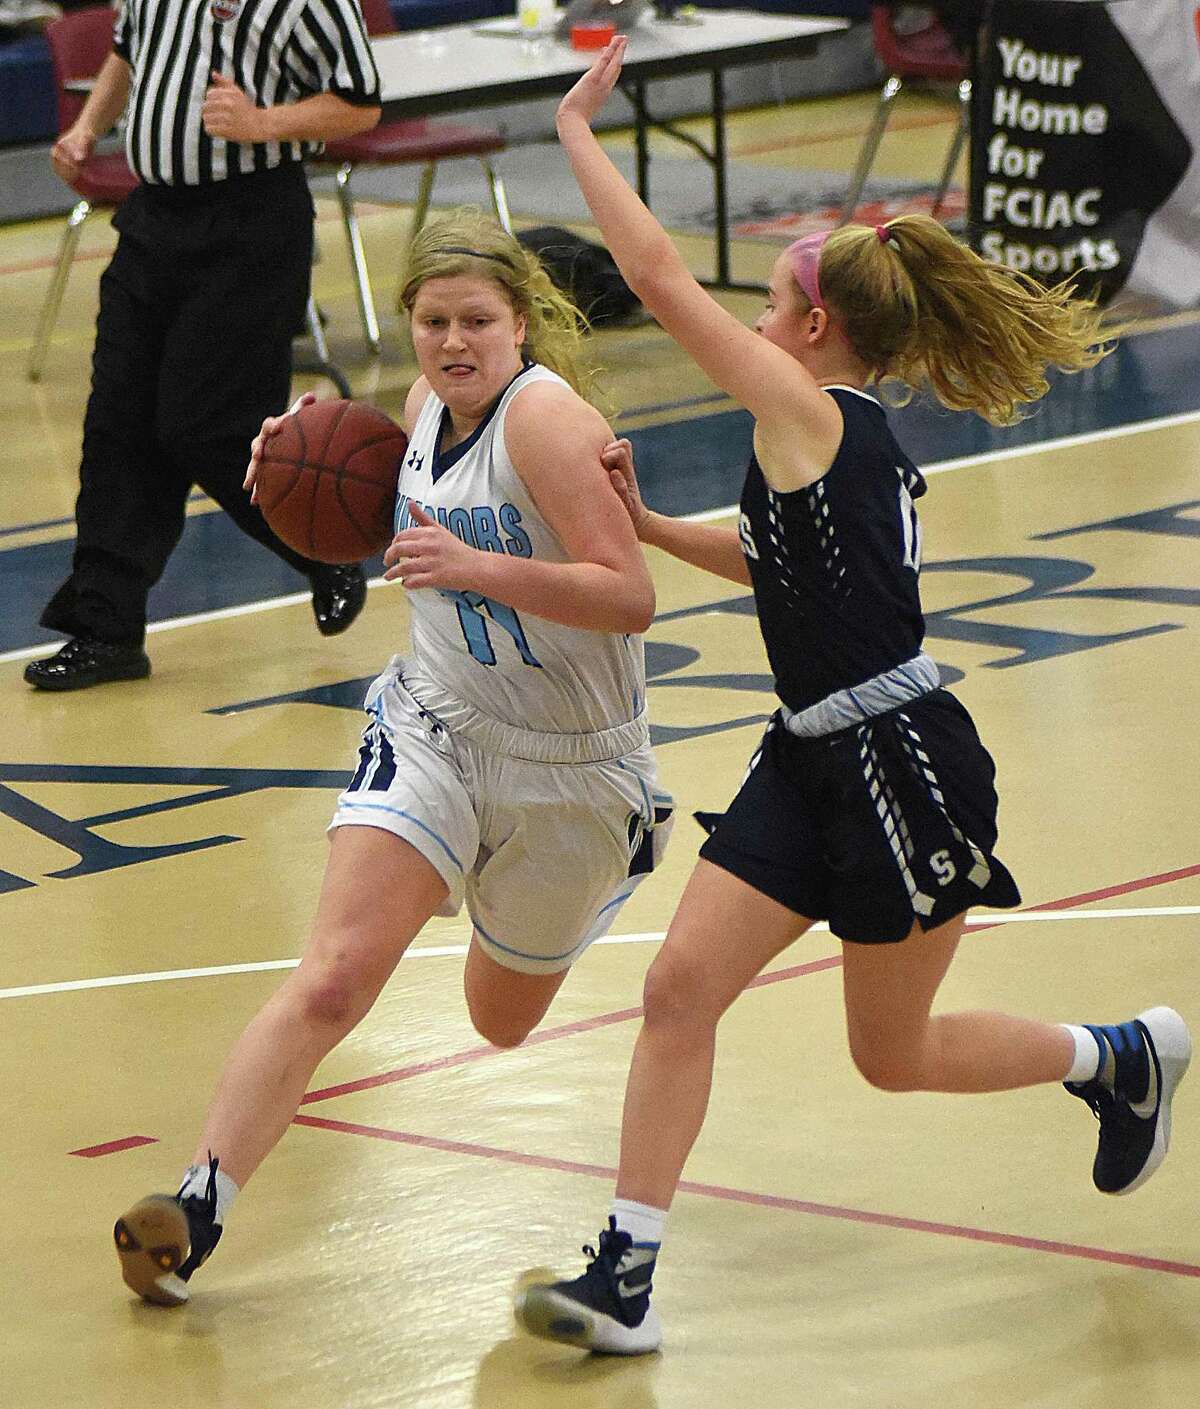 Claire Gulbin of Wilton, left, drives past Staples' Elle Fair during Saturday's FCIAC girls basketball quarterfinal at the Zeoli Field House in Wilton.